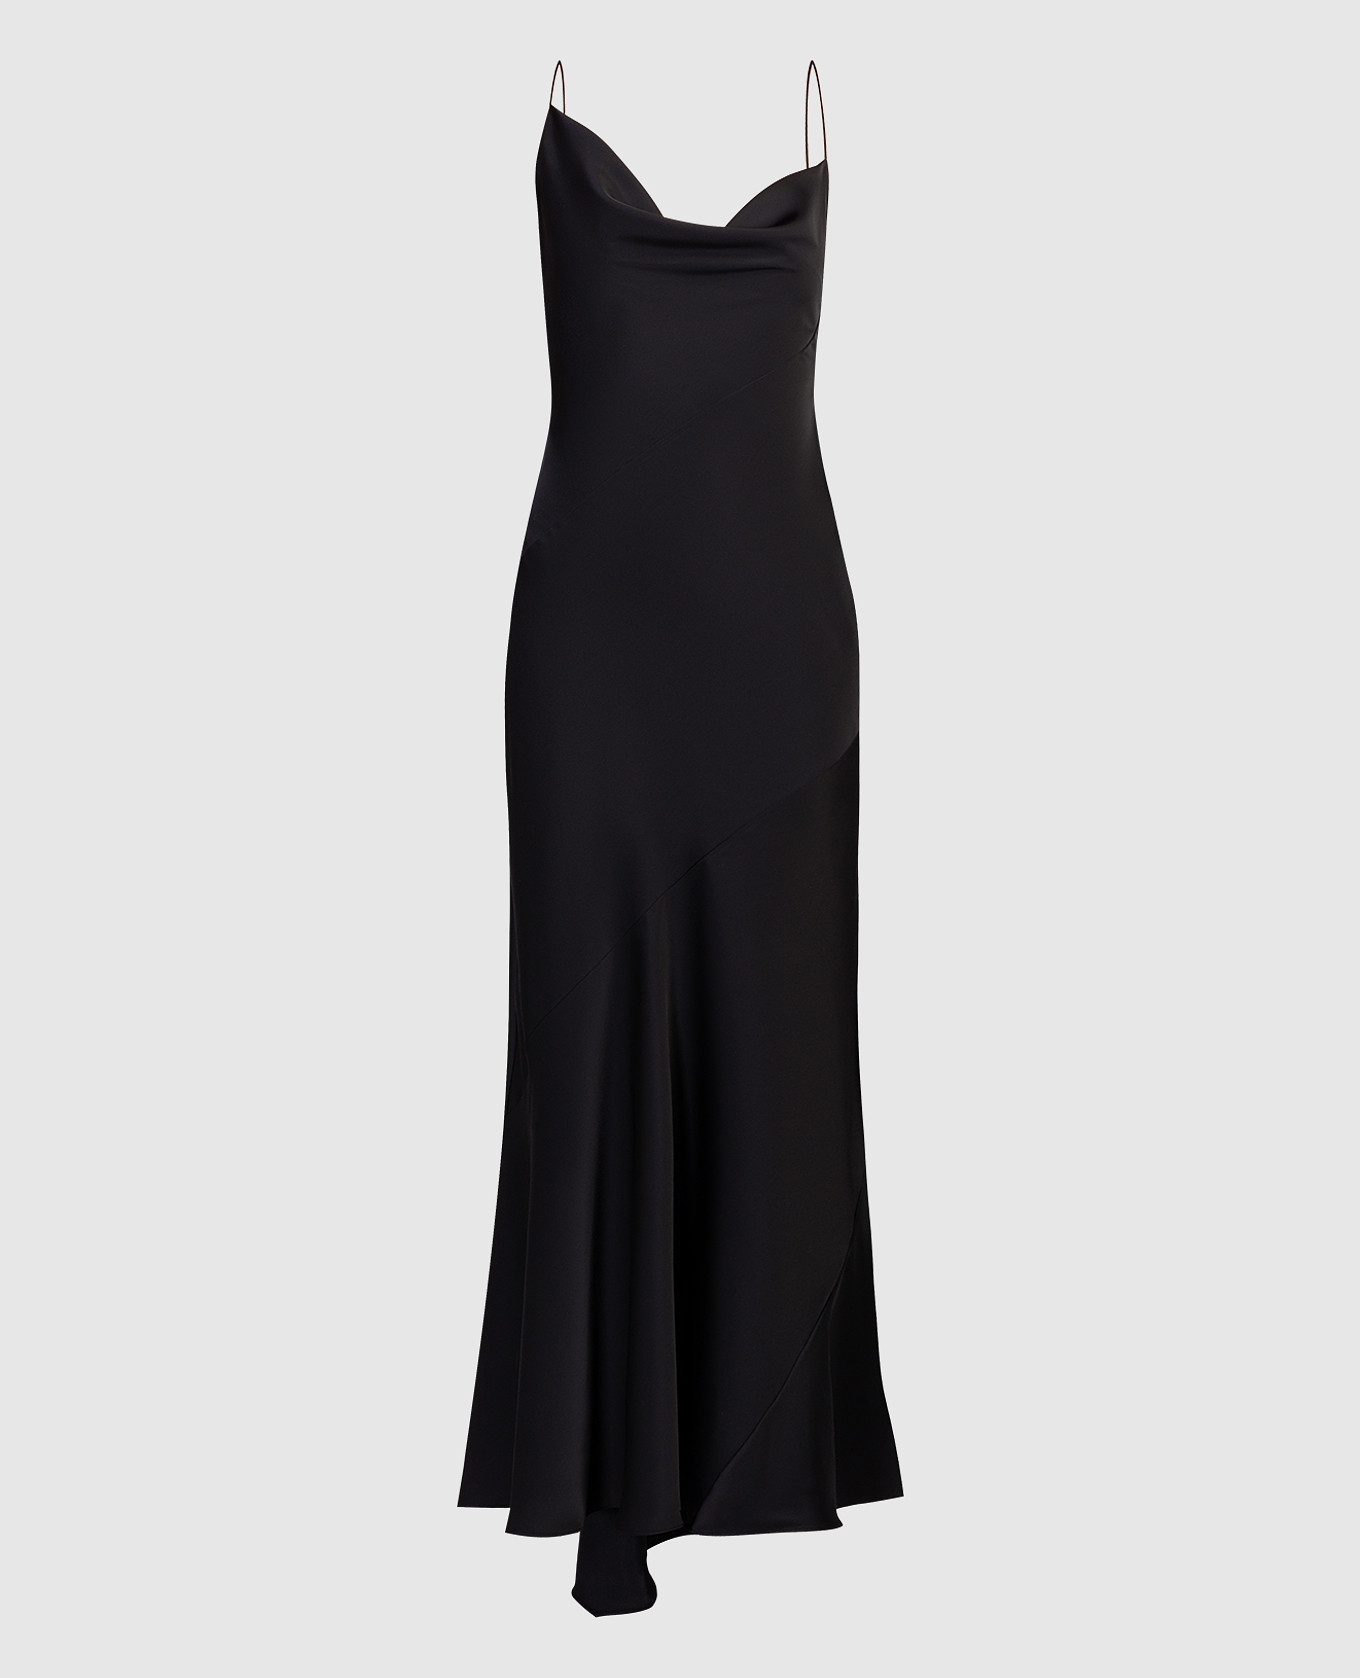 Black maxi dress with an open back